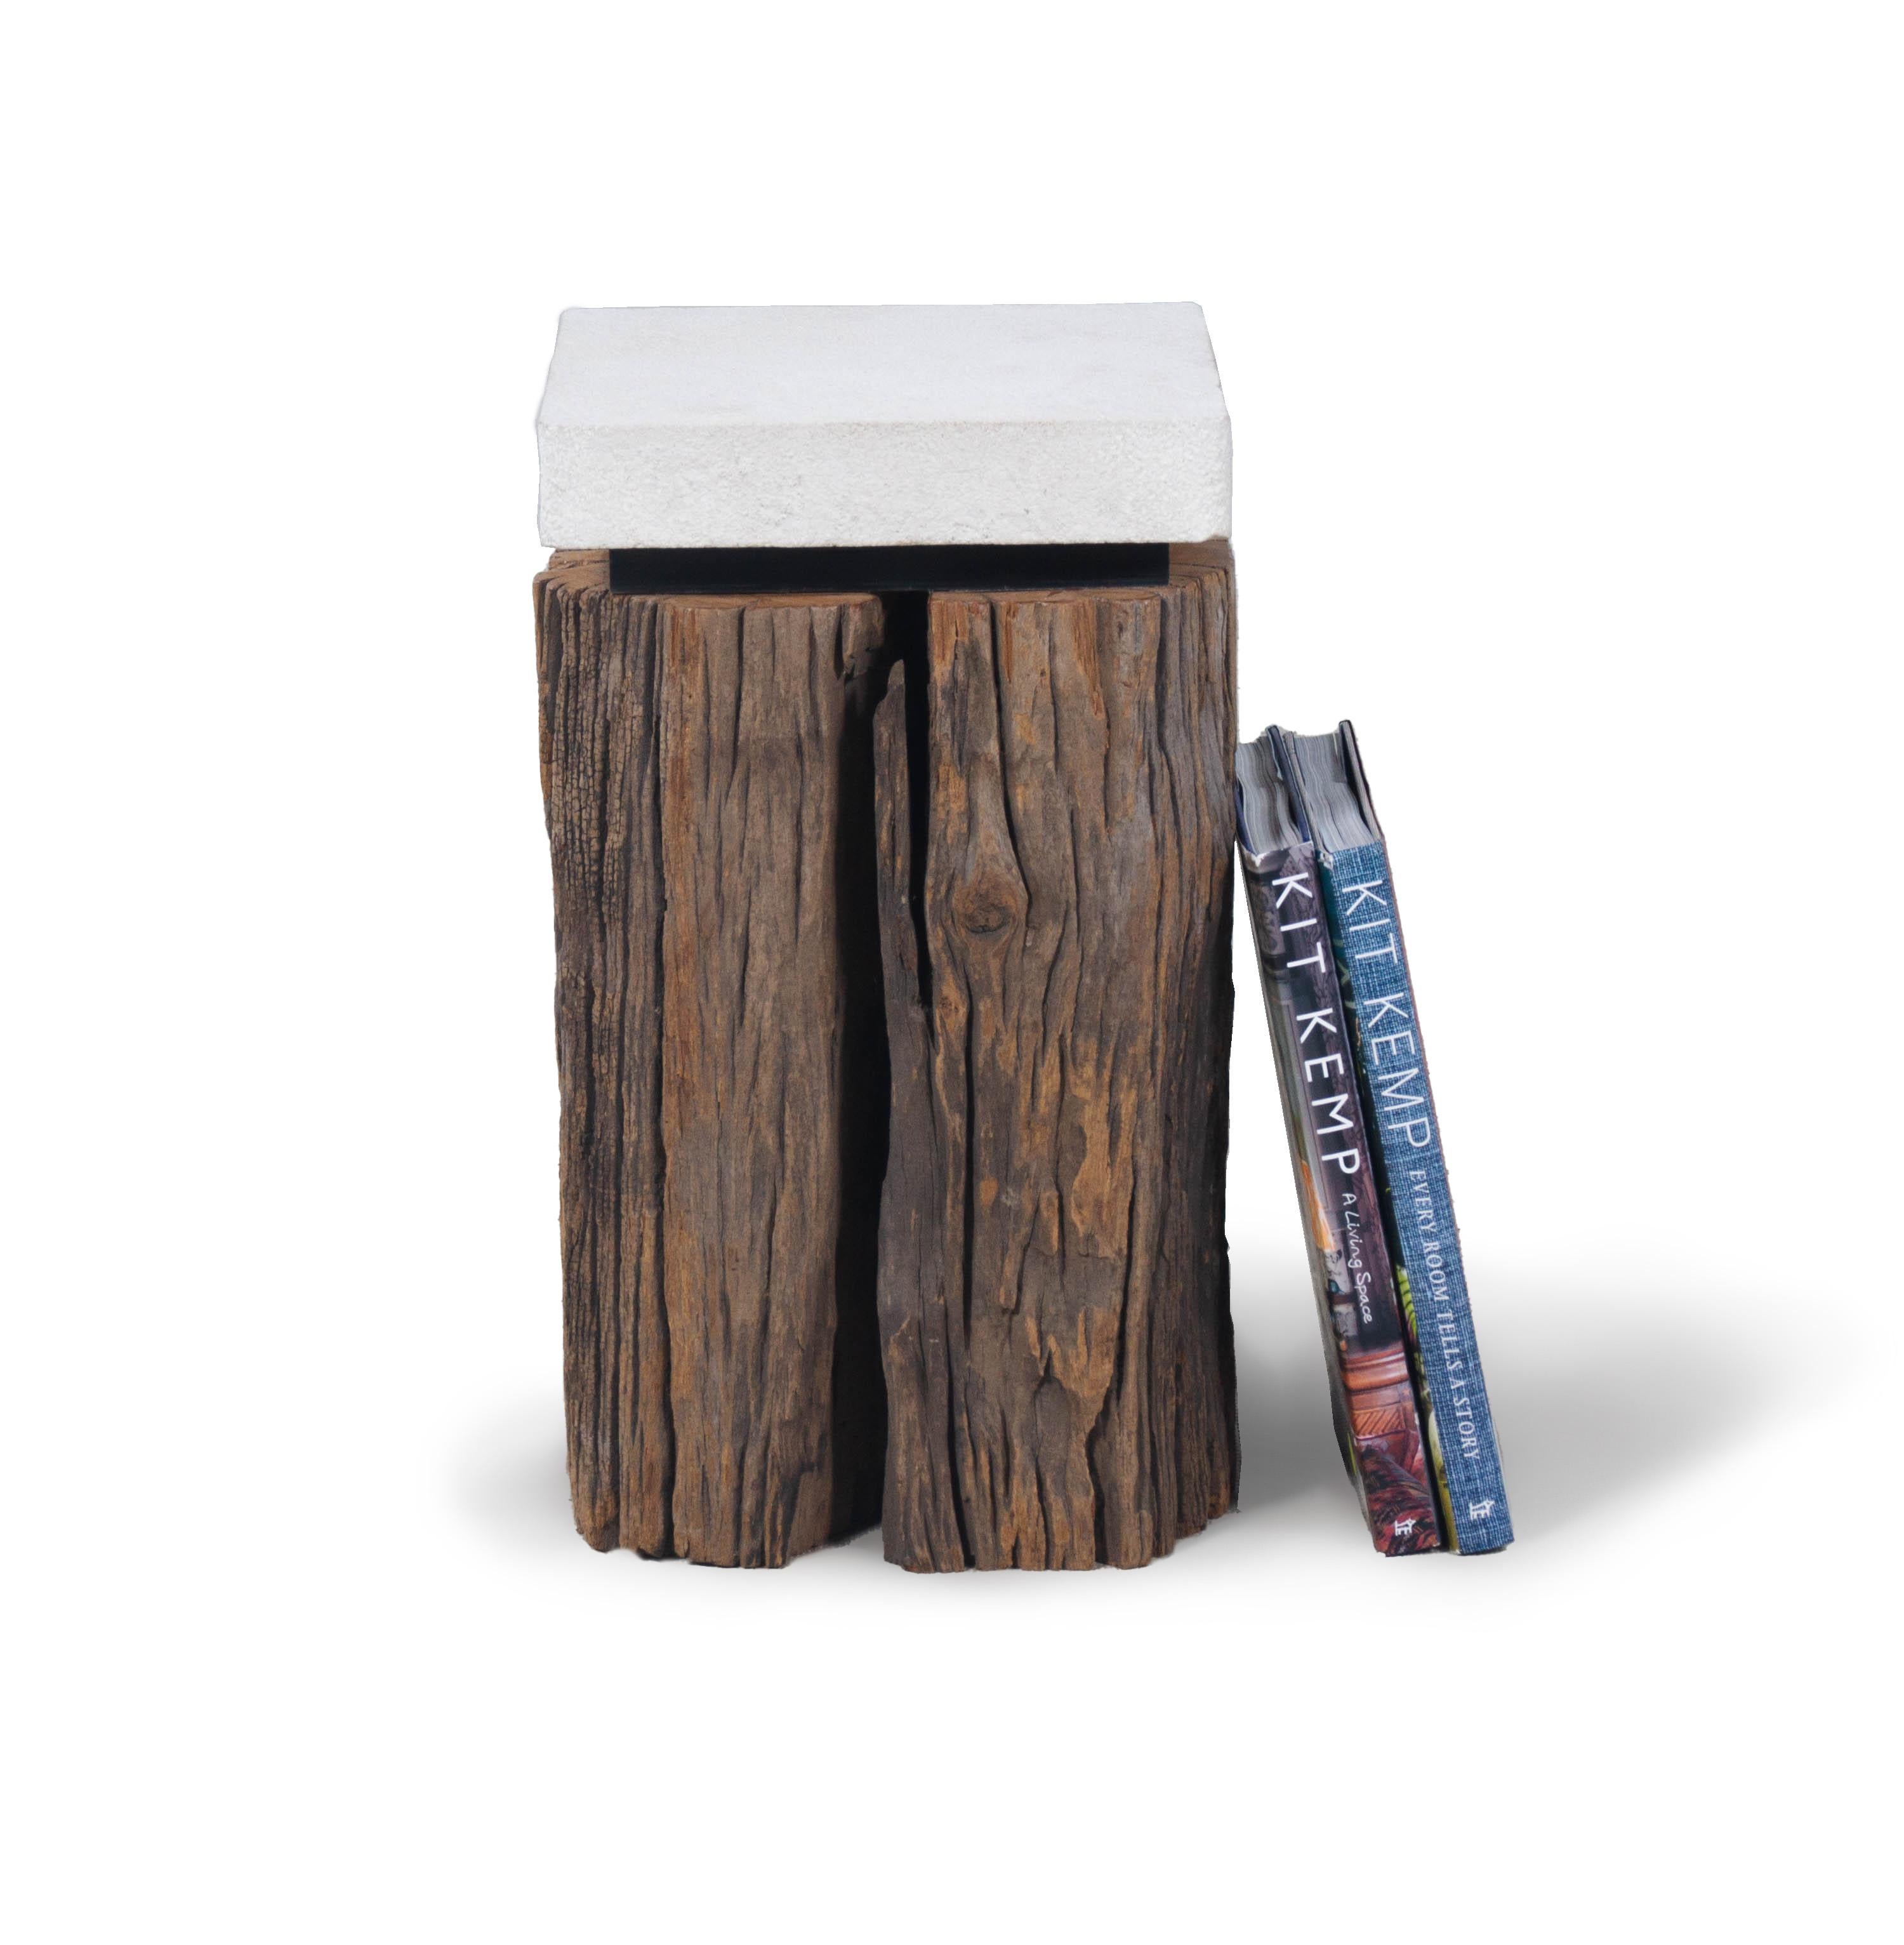 This end tables is made from a mildly weathered canal posts that features beautiful fissures that add organic texture and interest to any room. The wood features a rich walnut tone that marries perfectly with warm and cool color palettes. This